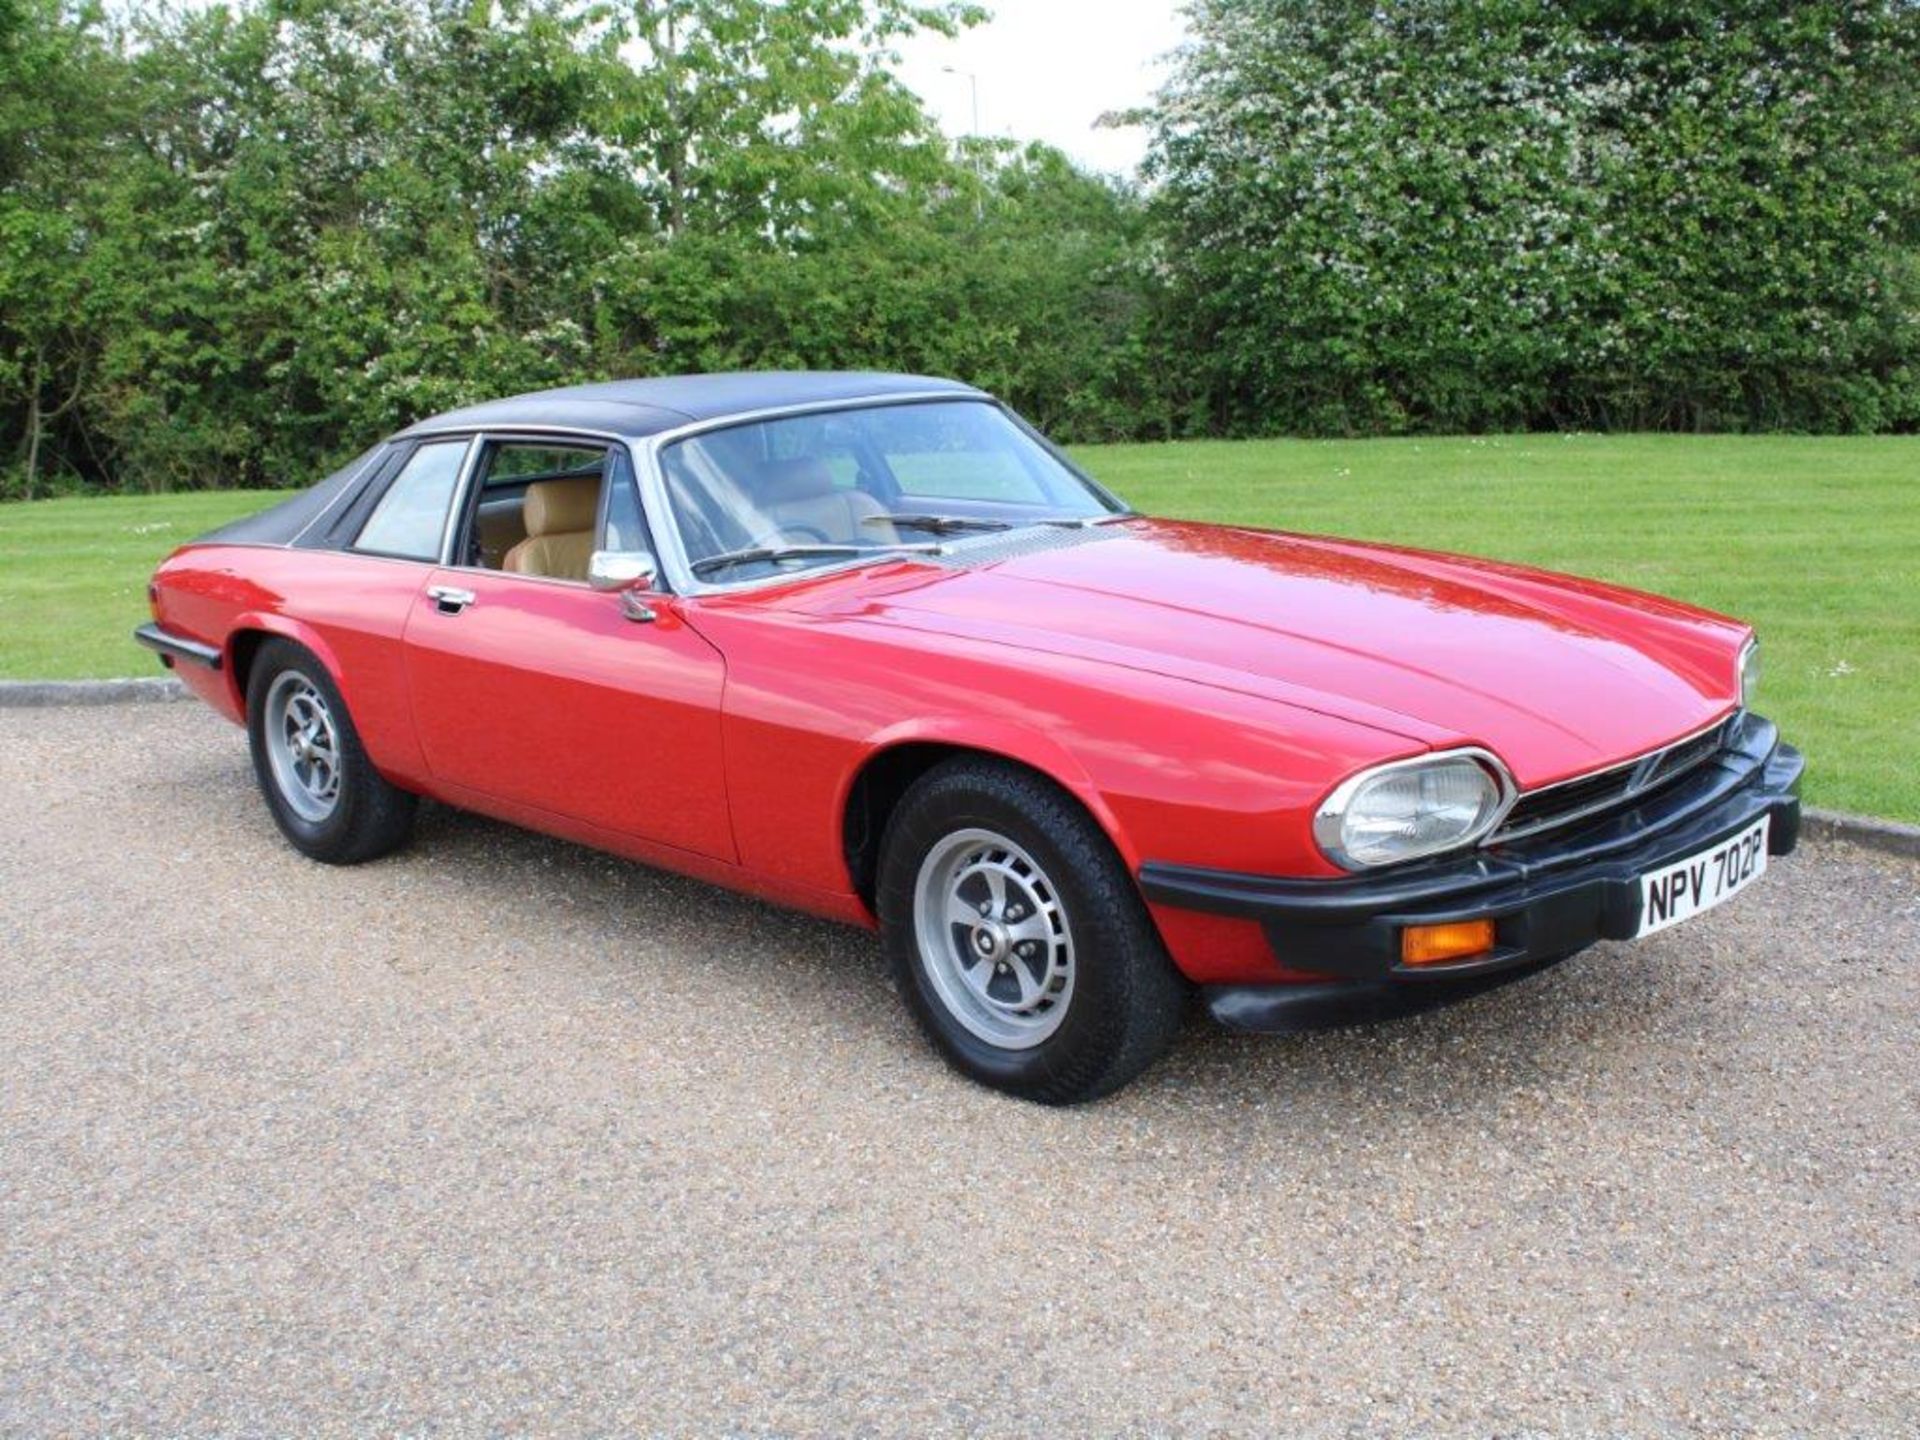 1976 Jaguar XJ-S 5.3 V12 Coupe Auto 29,030 miles from new